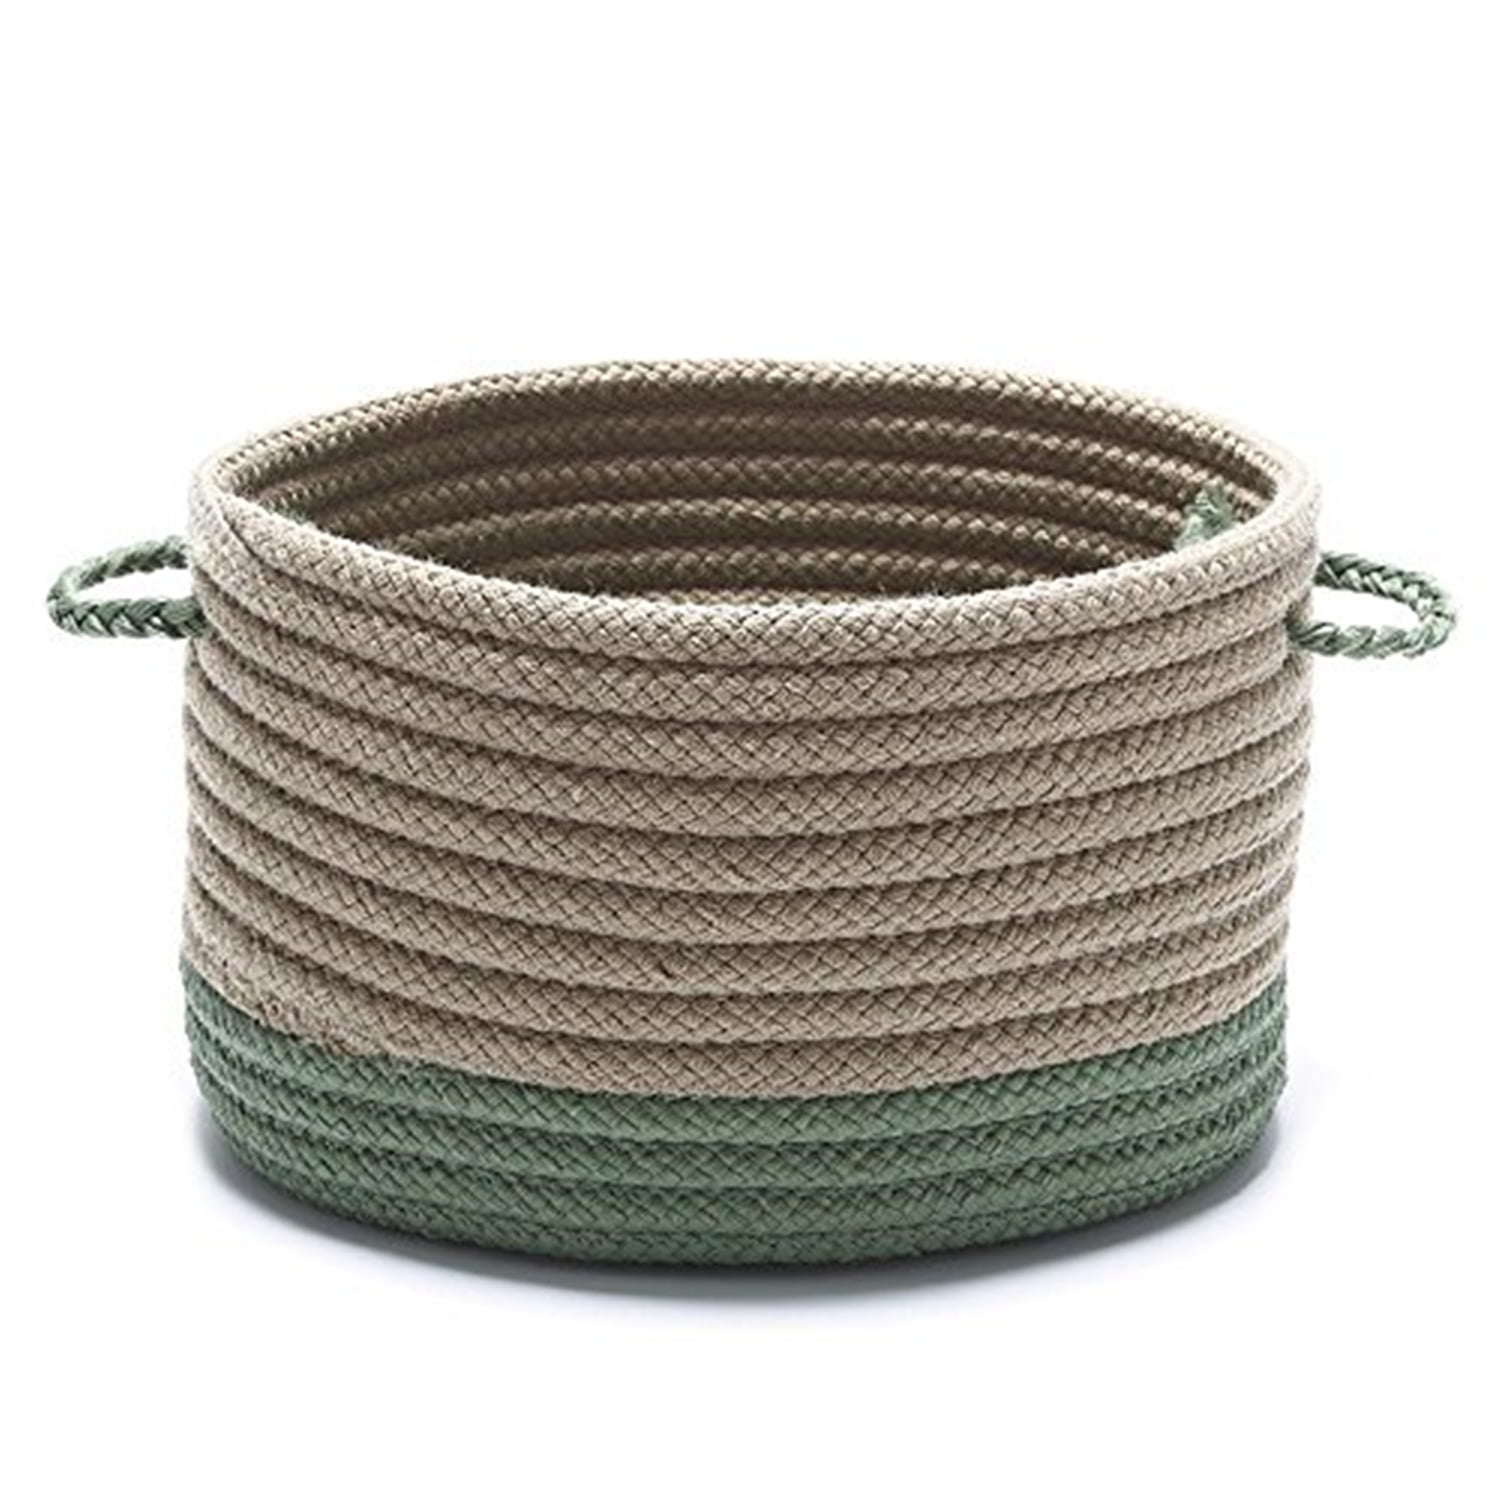 Picture of Colonial Mills IN61A012X012 12 x 12 x 12 in. Marina Round Basket, Mossgreen & N150